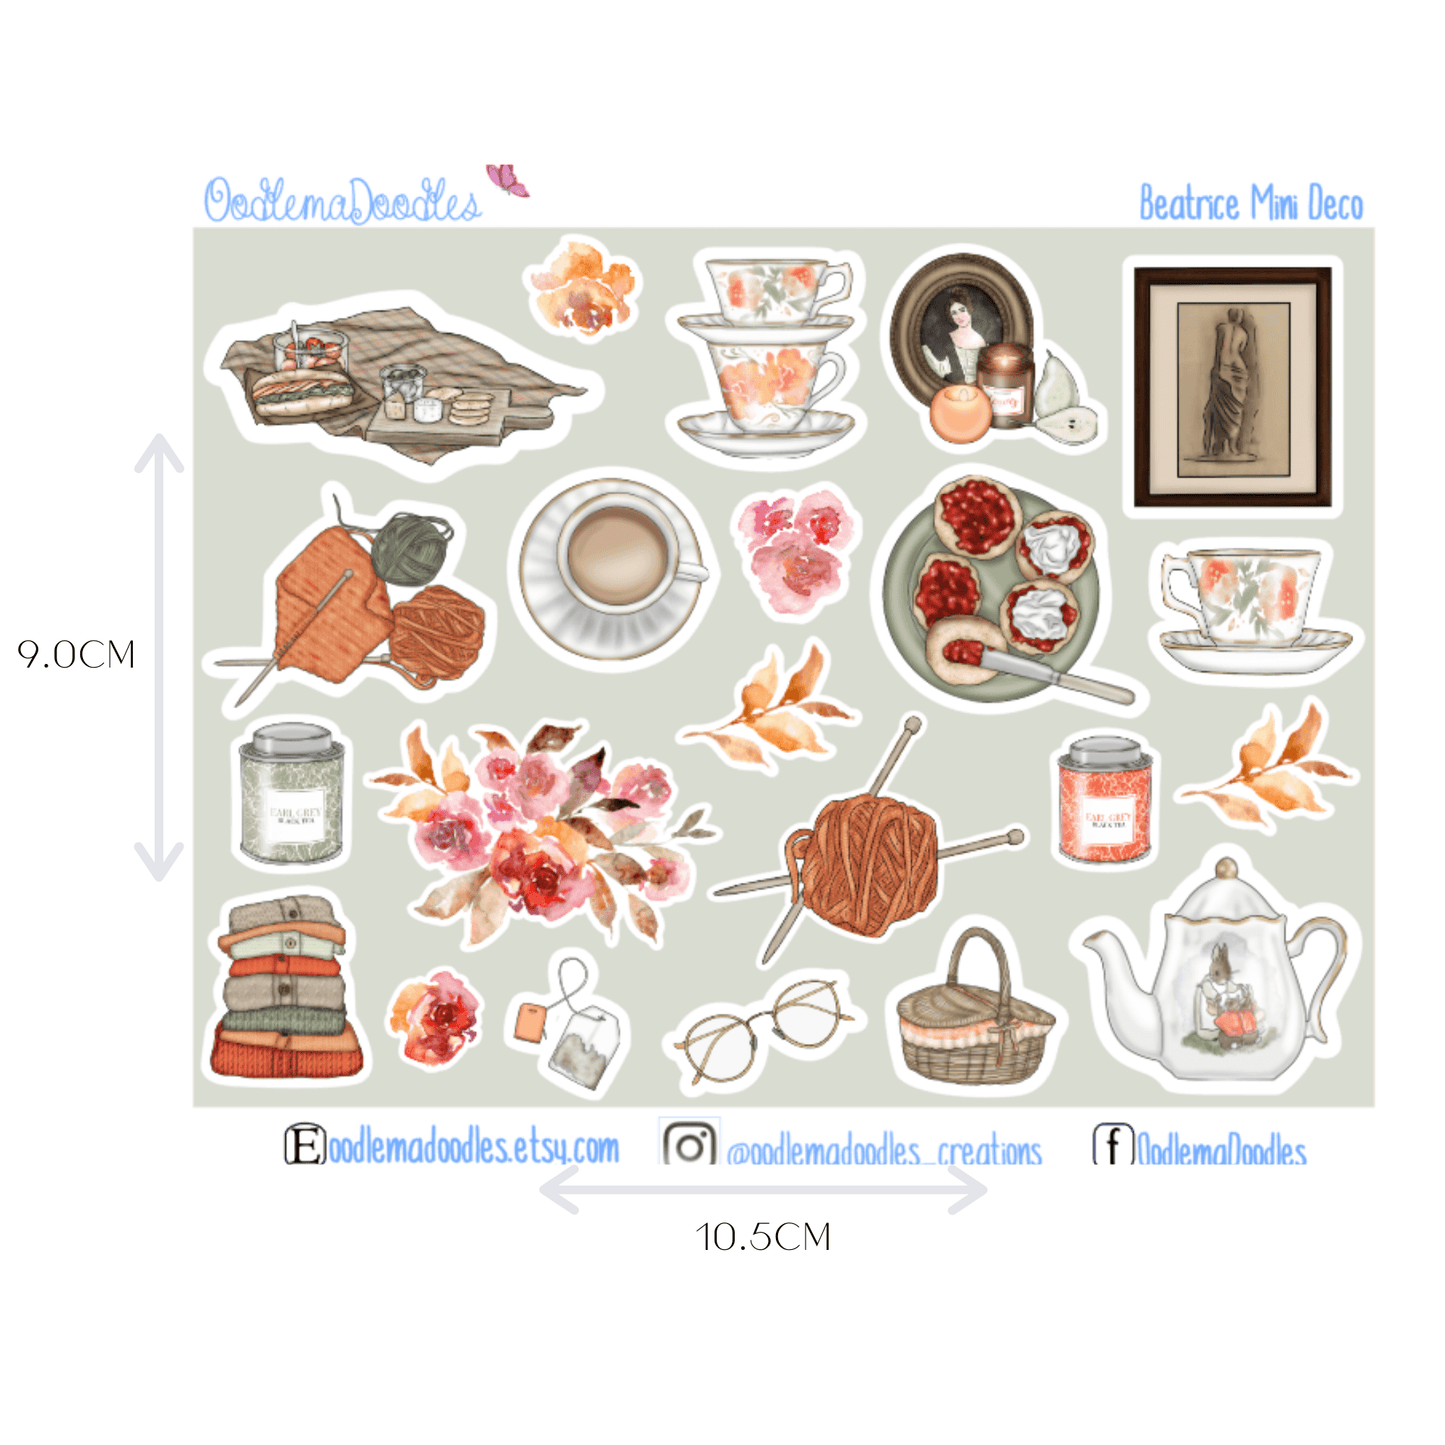 Beatrice Mini Decorative Stickers - oodlemadoodles